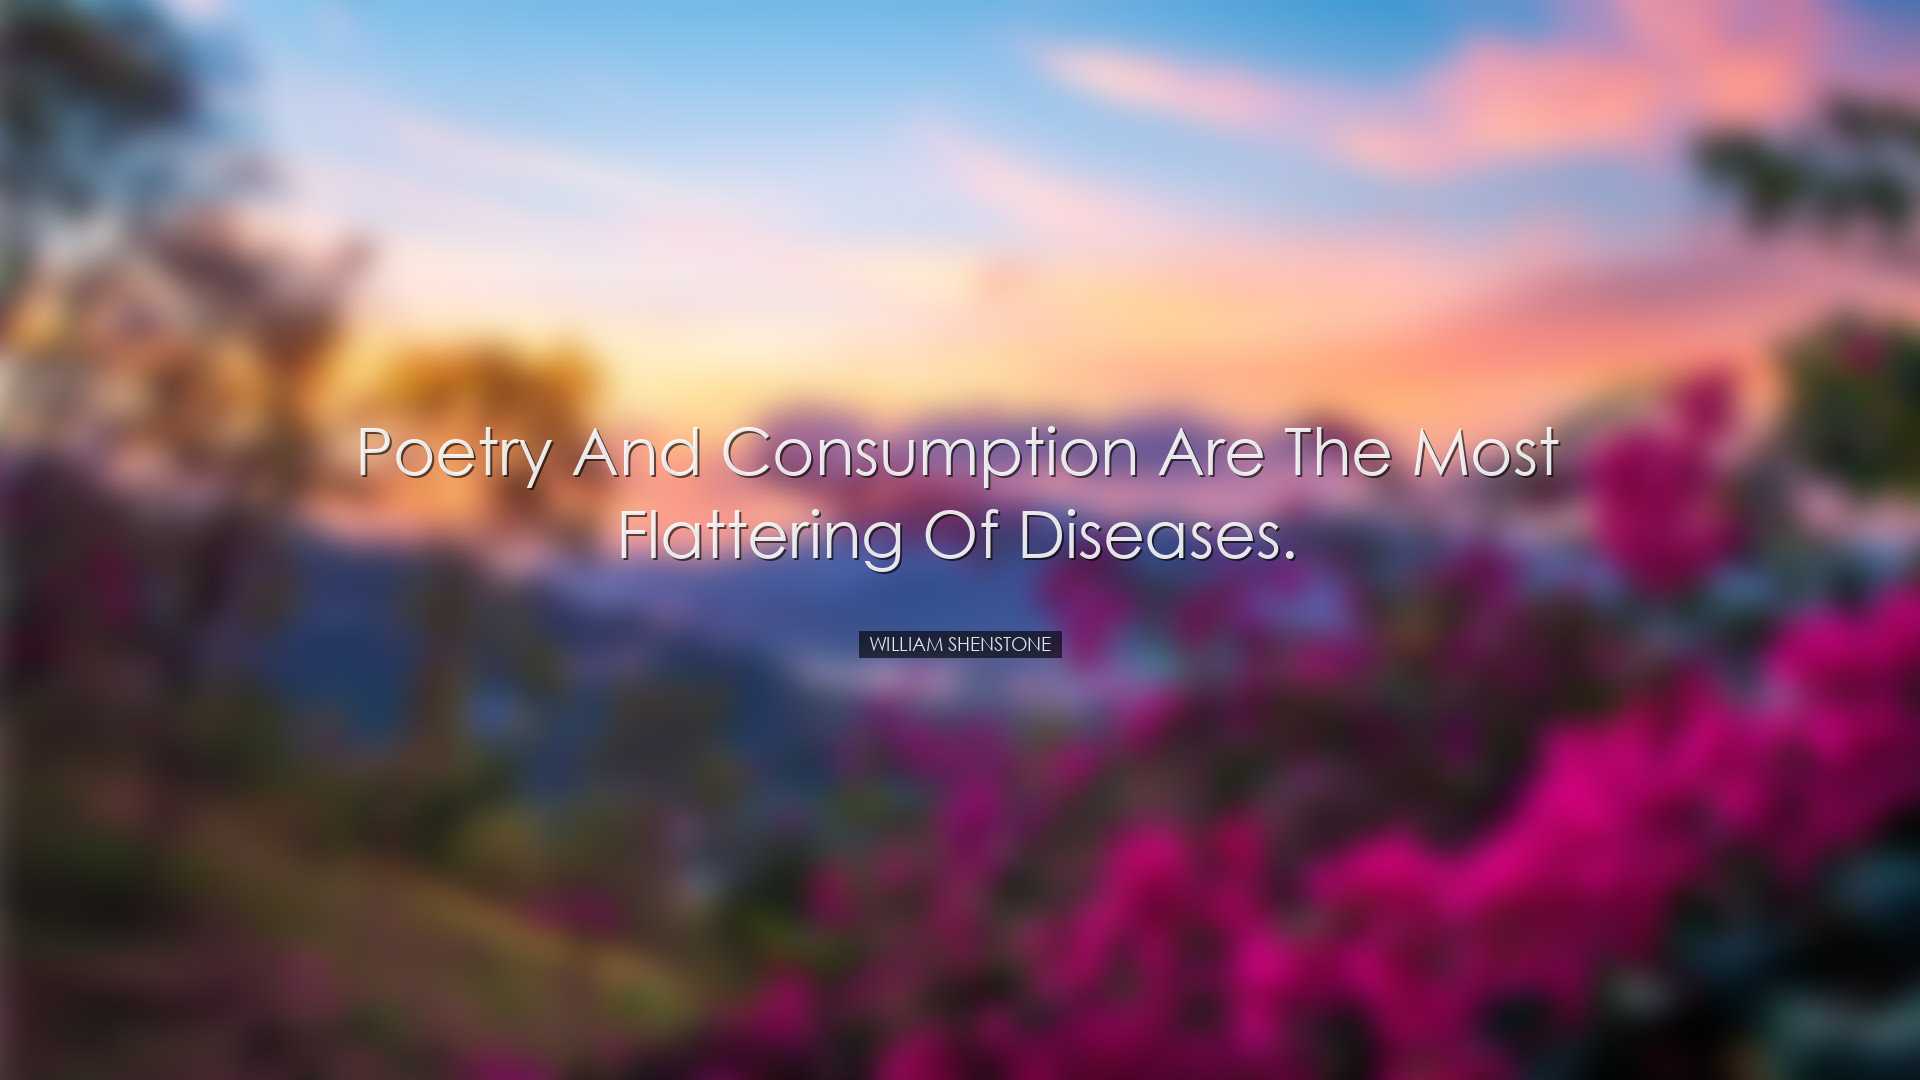 Poetry and consumption are the most flattering of diseases. - Will